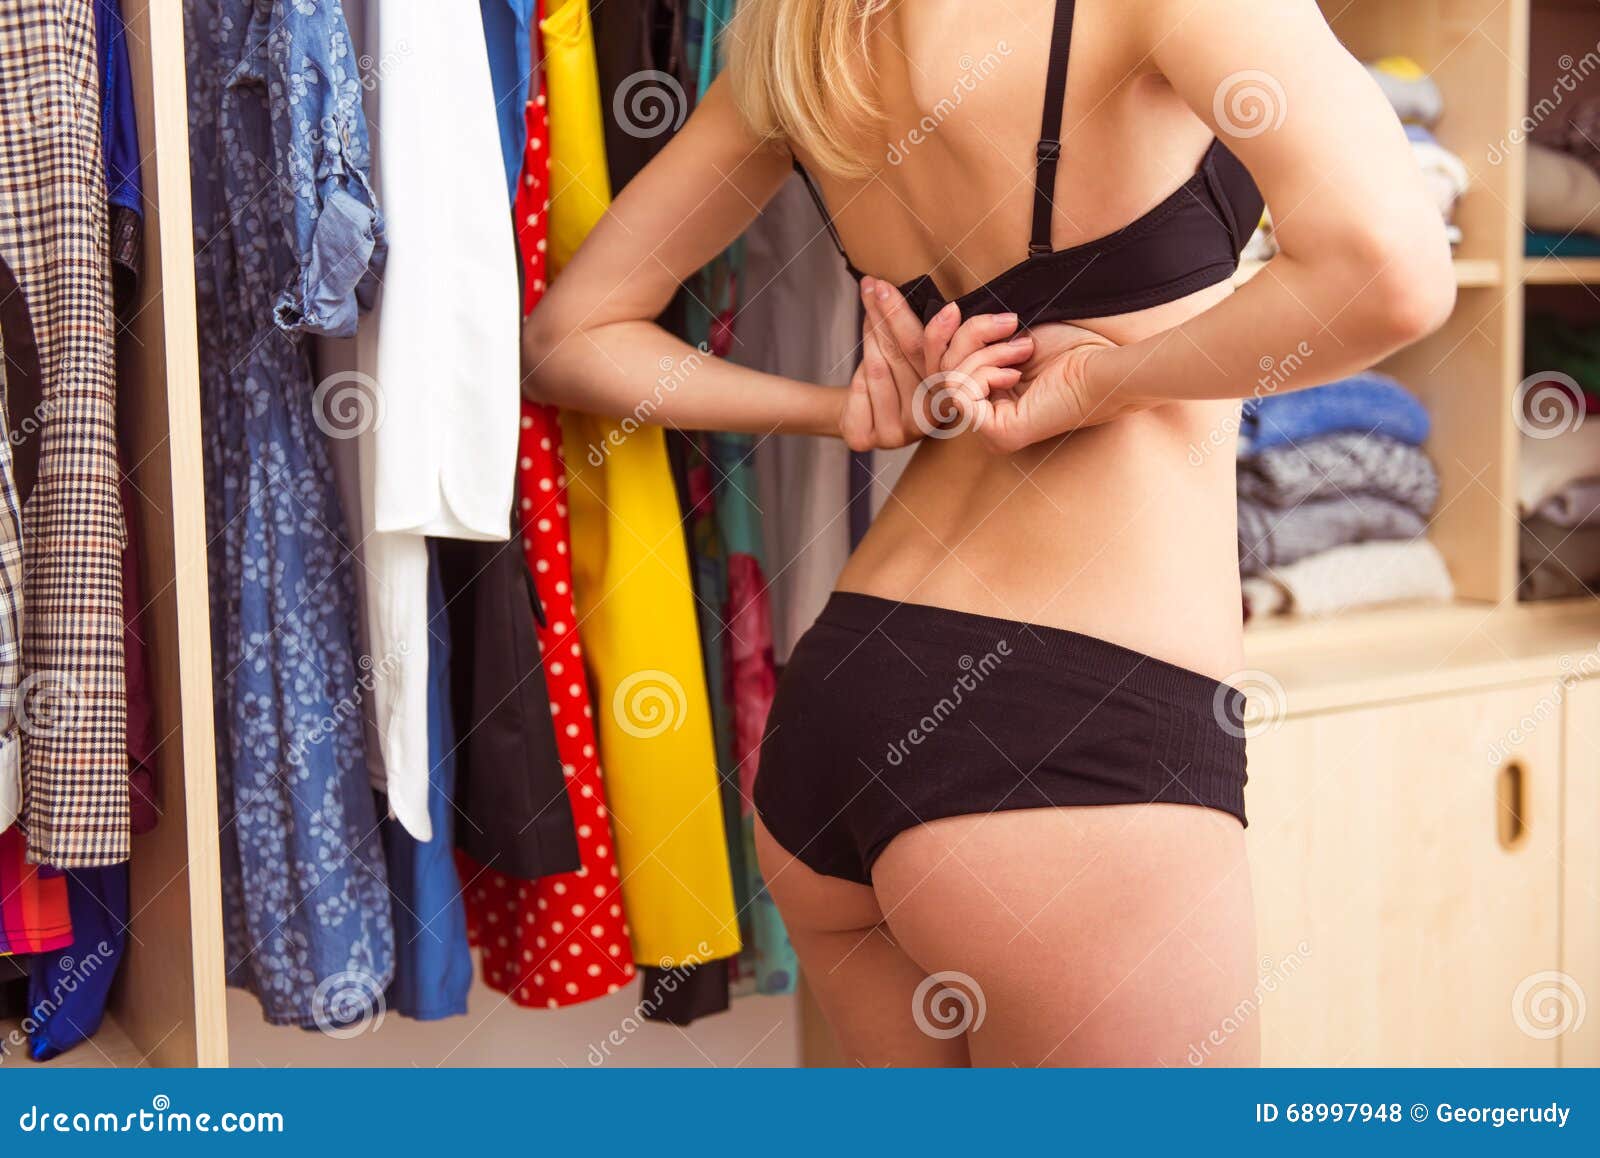 Dressing room girl puts on pink and then beige lingerie